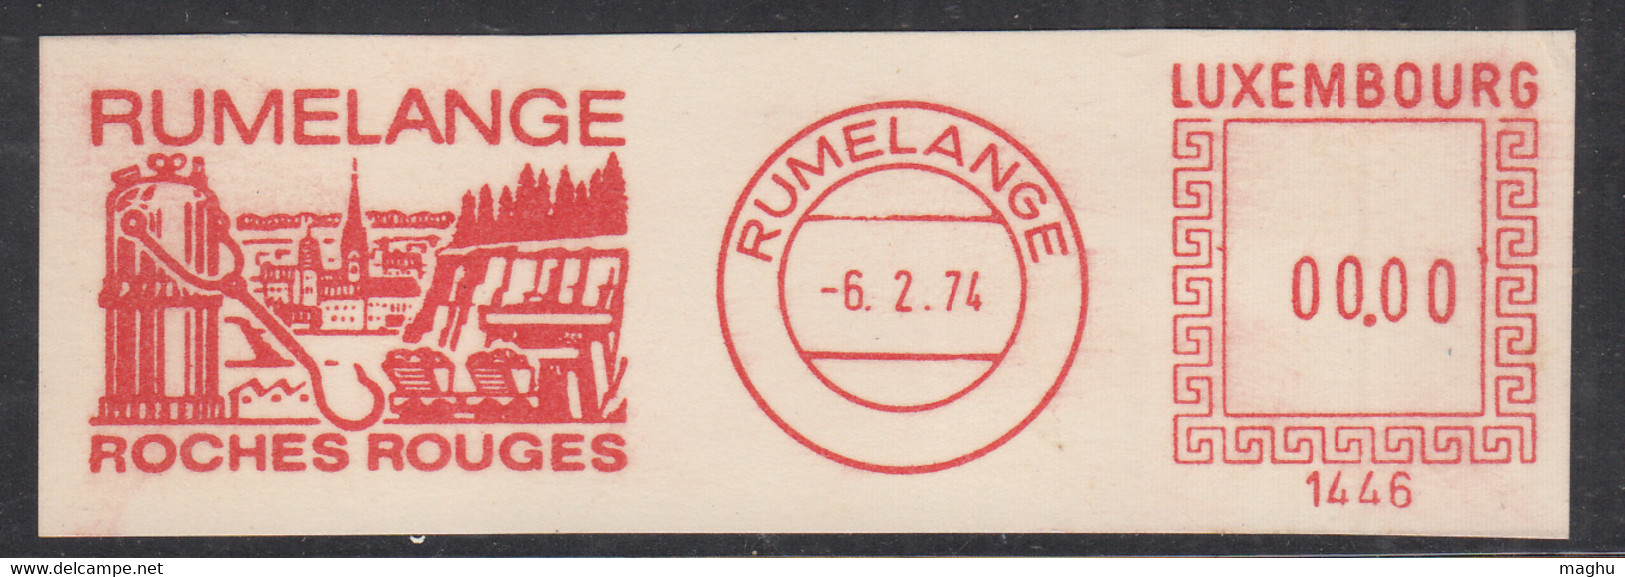 00.00 Value, Trial Meter Cancellation?, ATM Machine Stamp, Luxemburg, Rumelange Rochhes Rouges, Mineral, Mining Tools, - Macchine Per Obliterare (EMA)